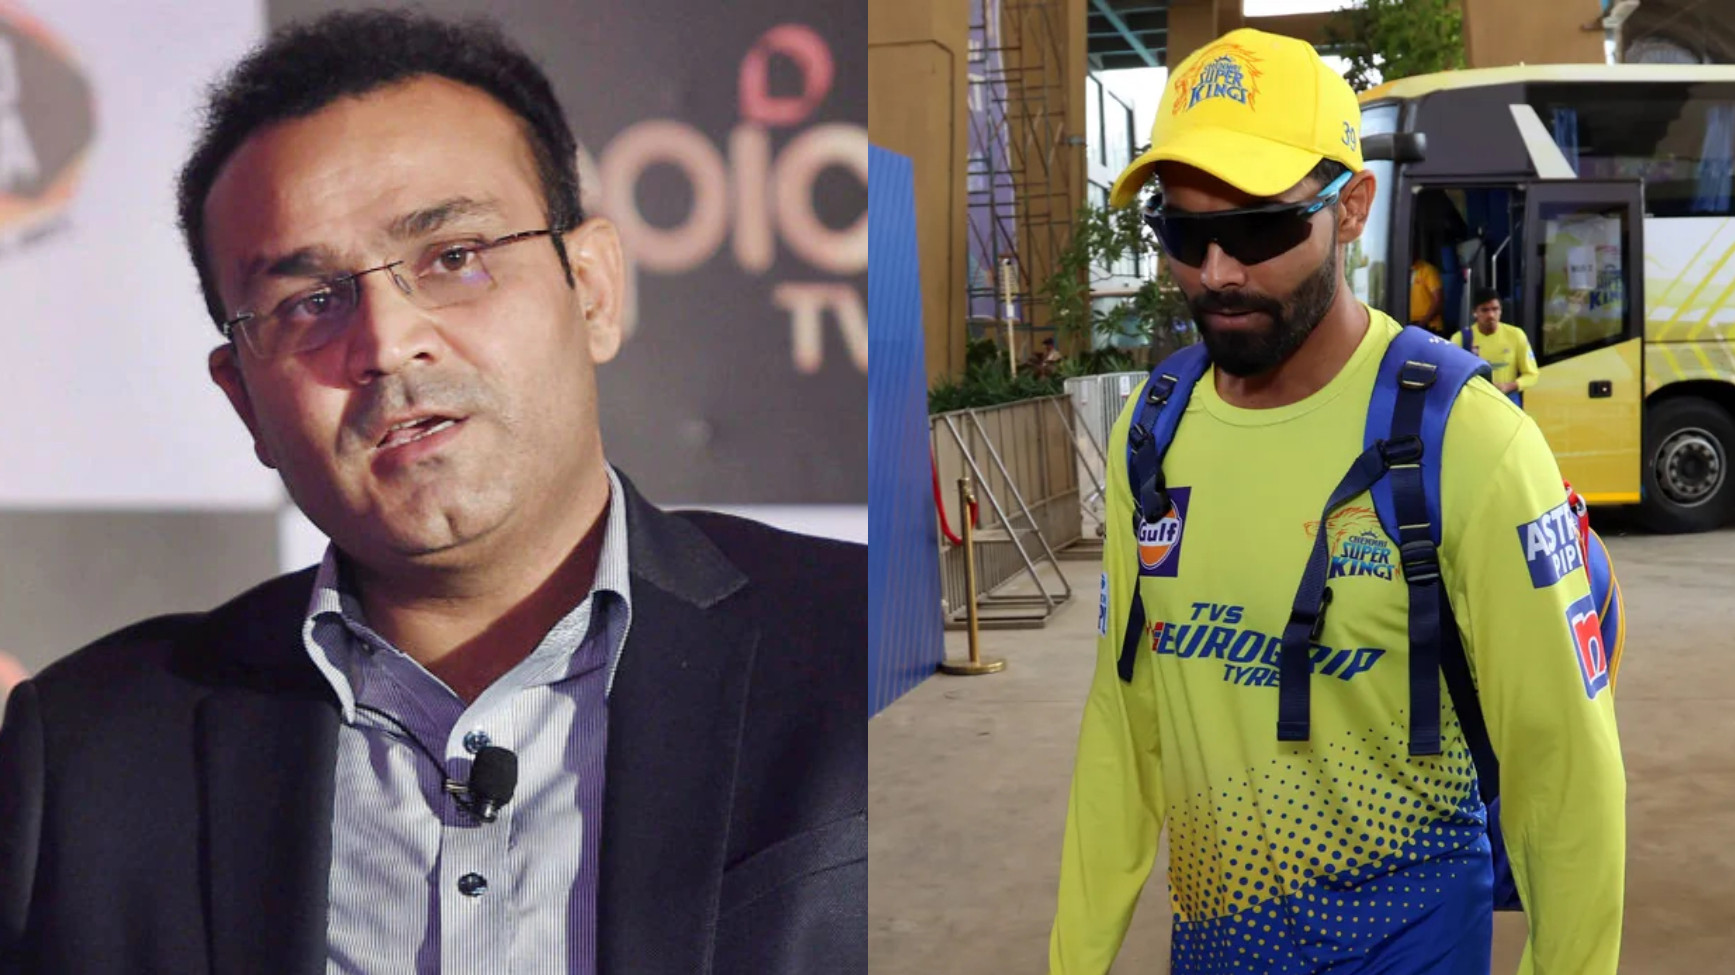 IPL 2022: Put your phone on airplane mode - Sehwag advises Jadeja to shun outside noise after CSK’s disastrous start